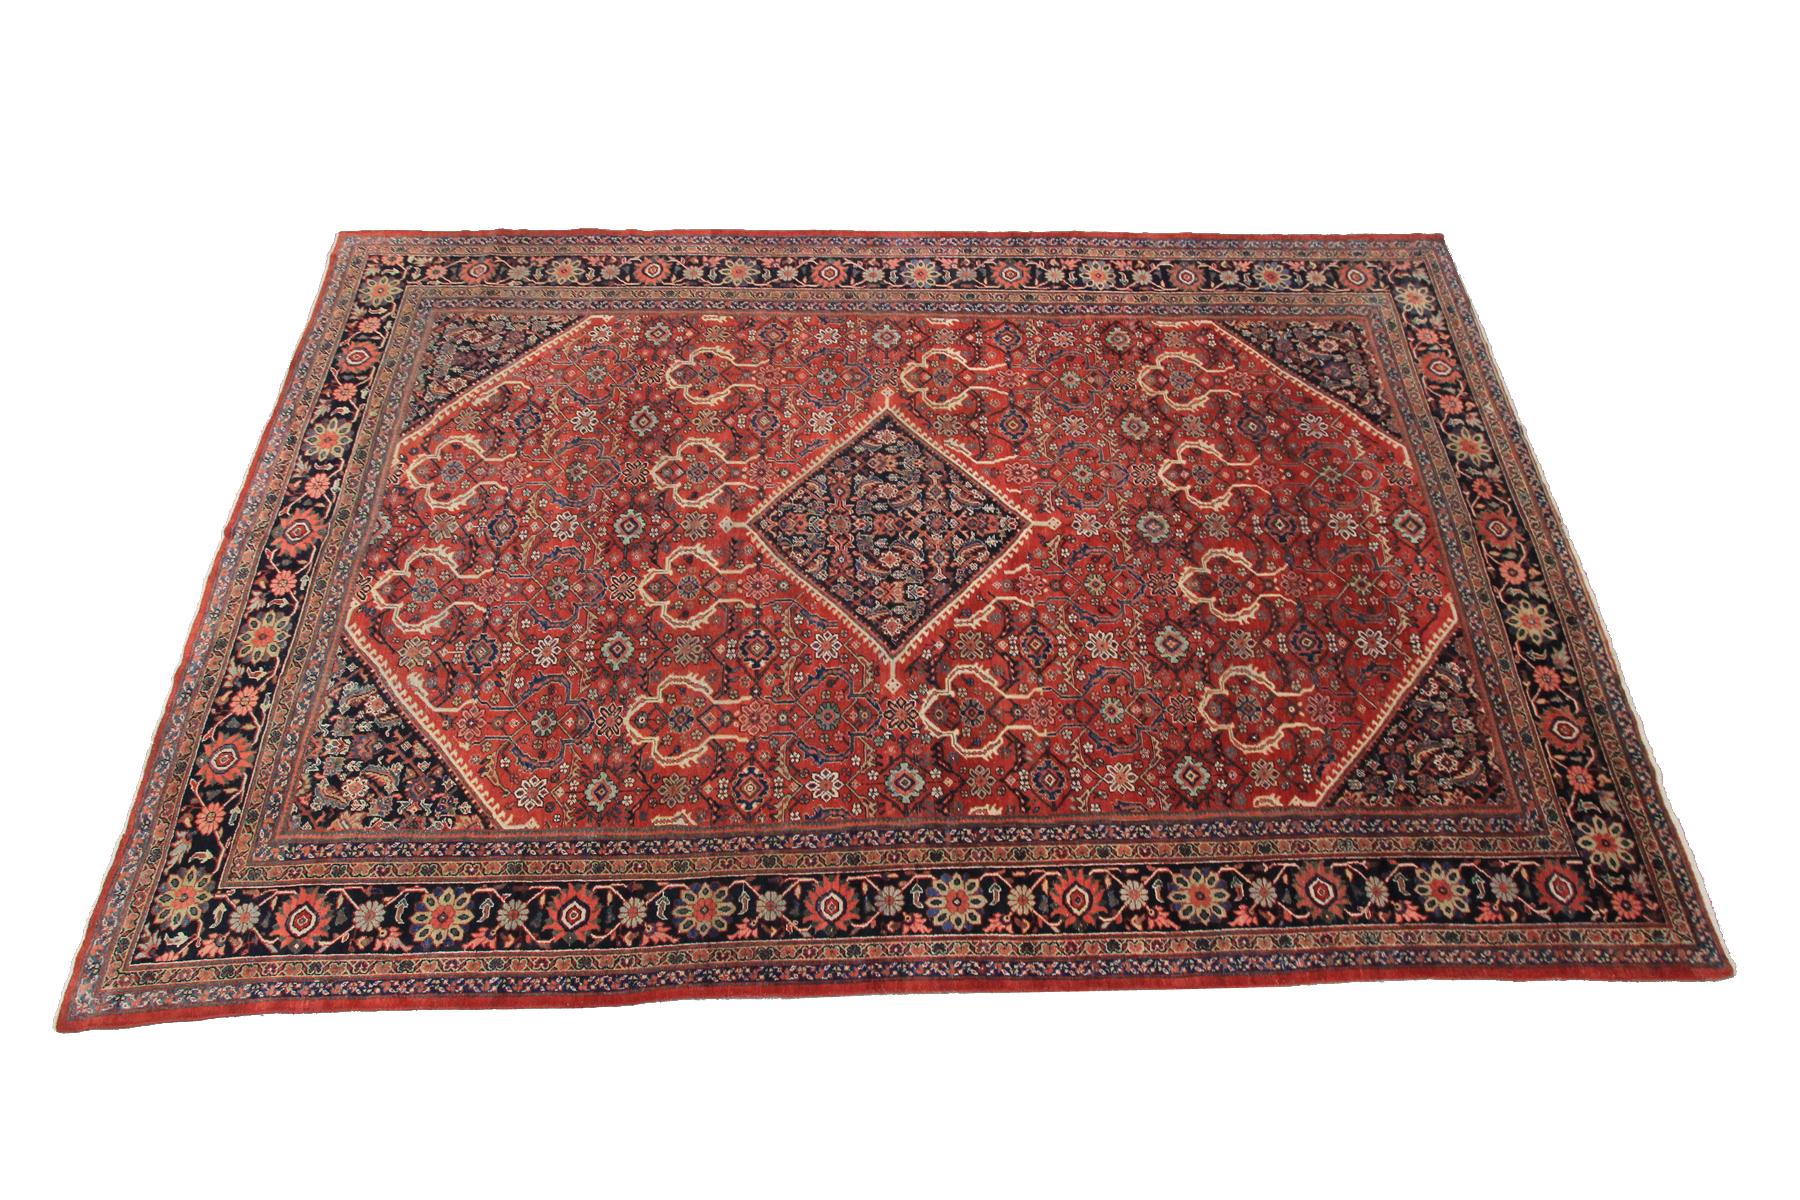 Antique Persian Mahal Rug Antique Sultanabad Rug Geometric In Good Condition For Sale In New York, NY